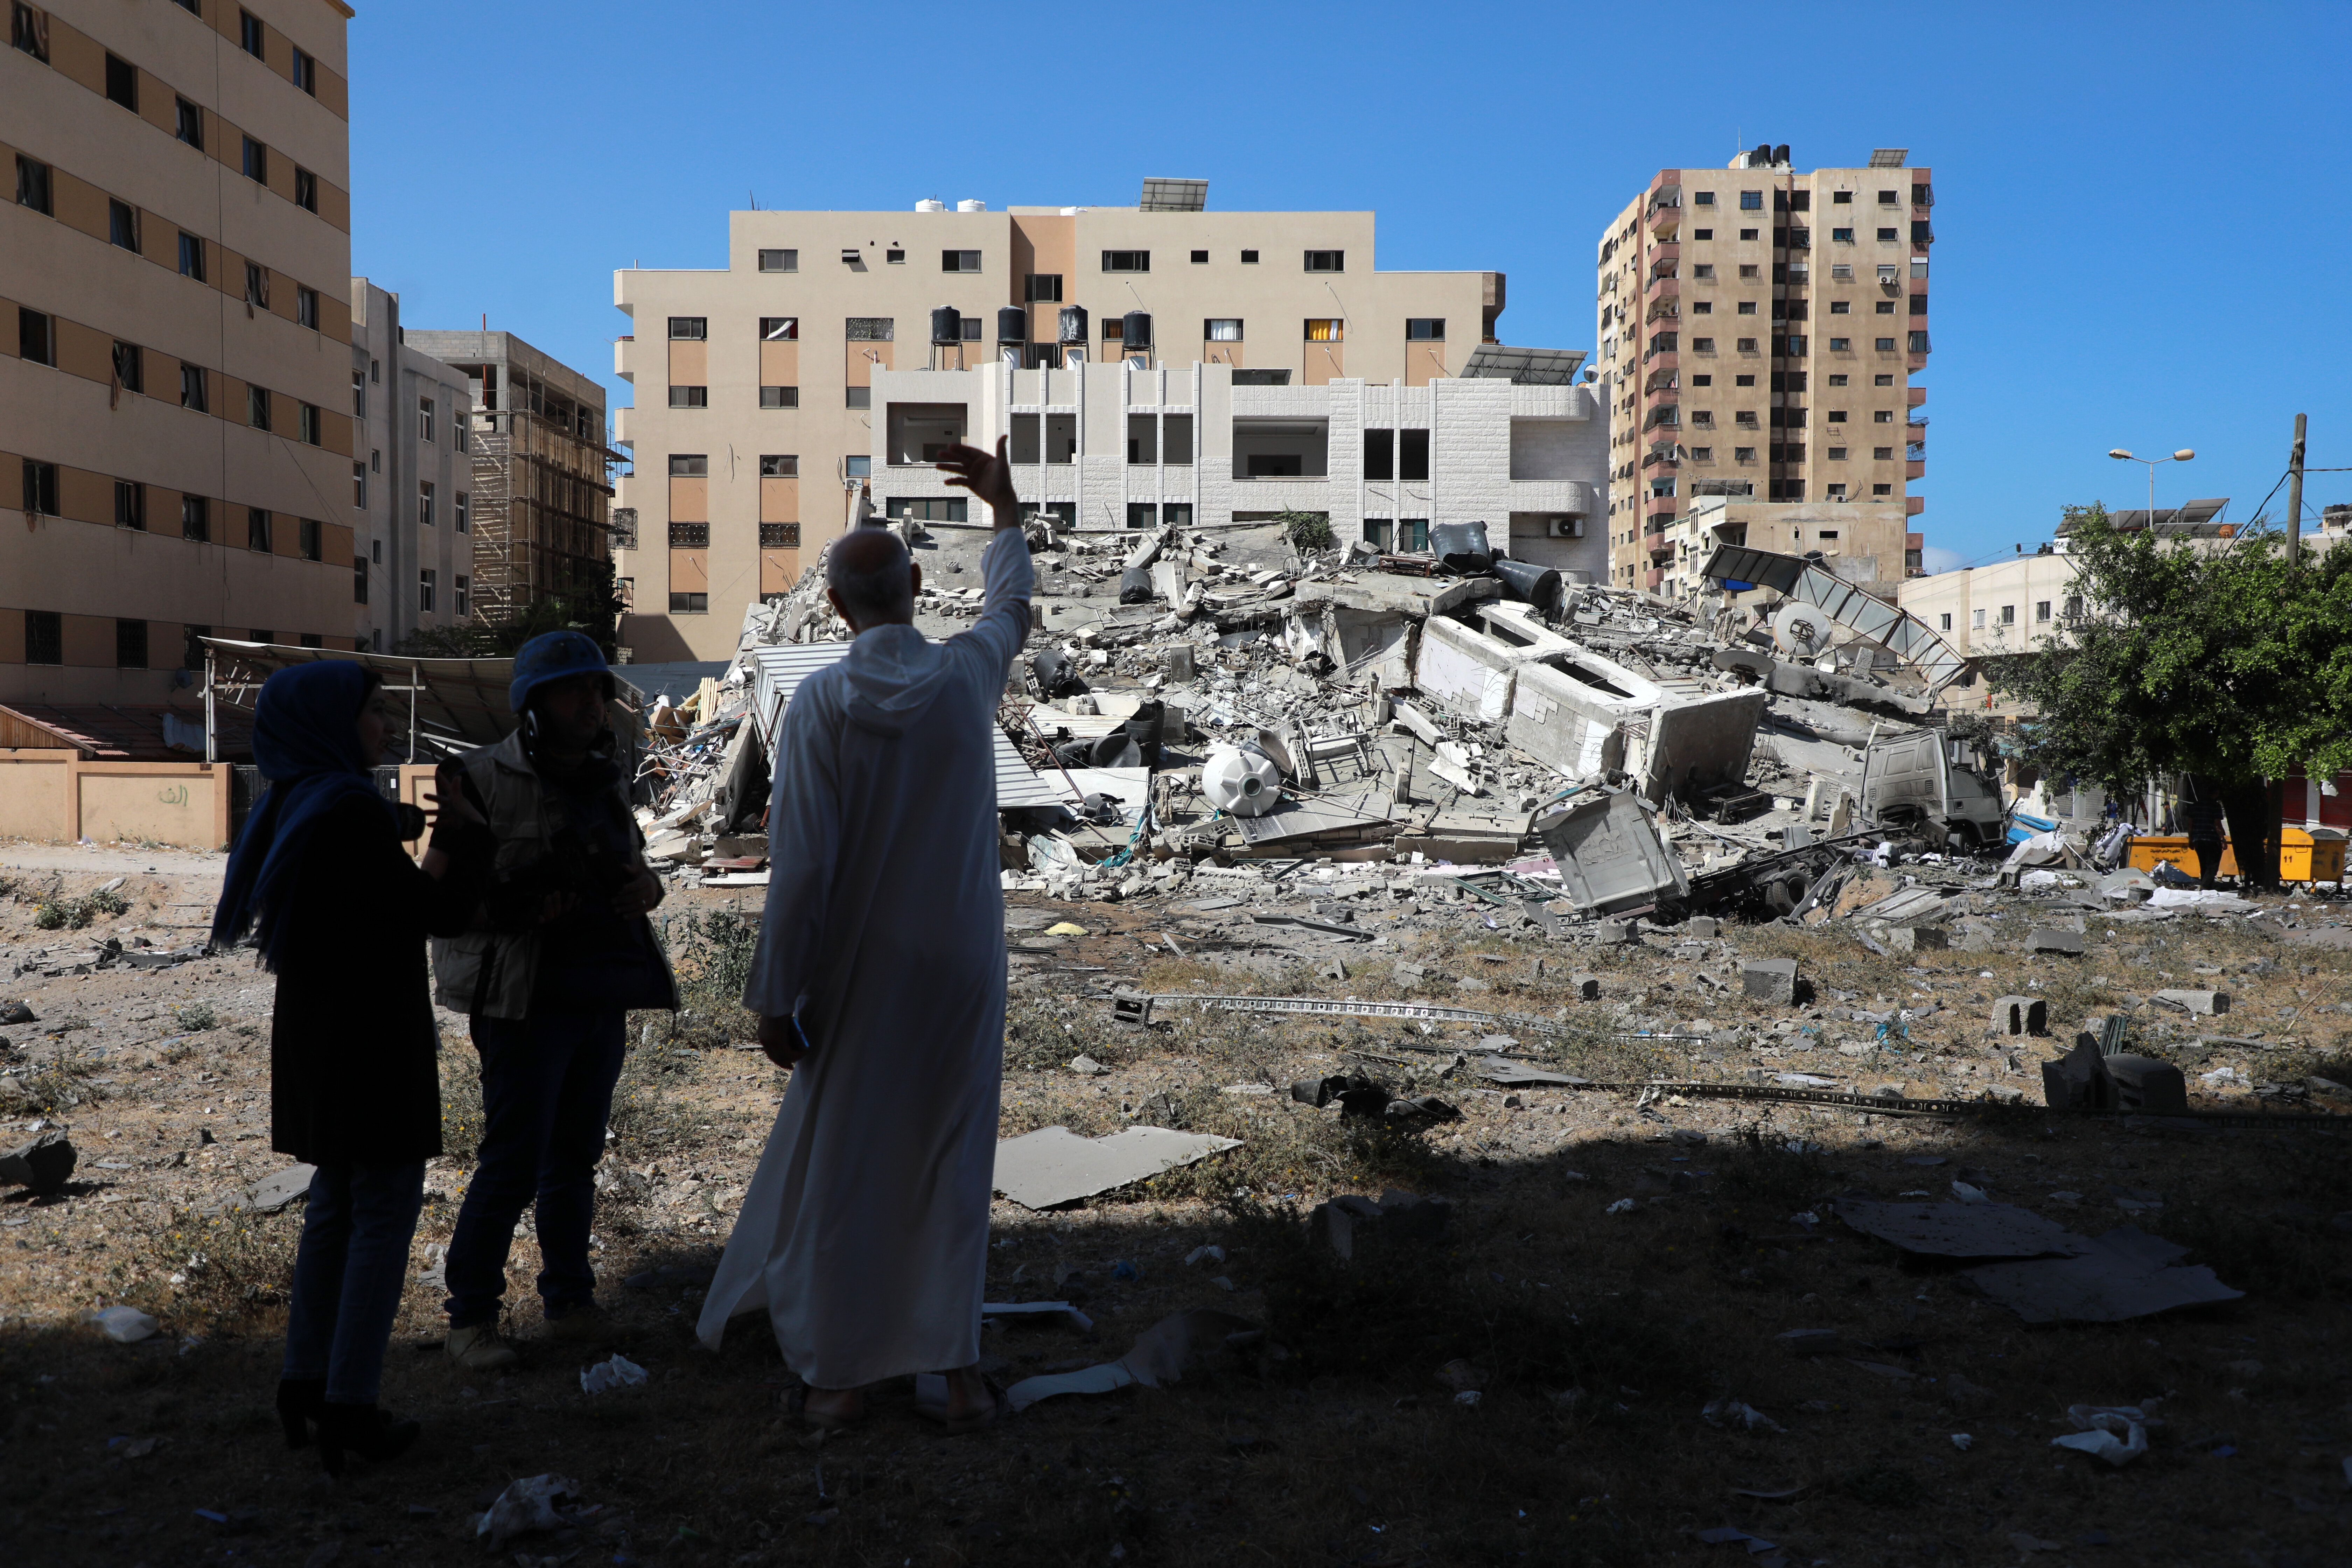 A Palestinian man stands near the remains of a building after it was destroyed in Israeli air strikes in Gaza City on May 18,